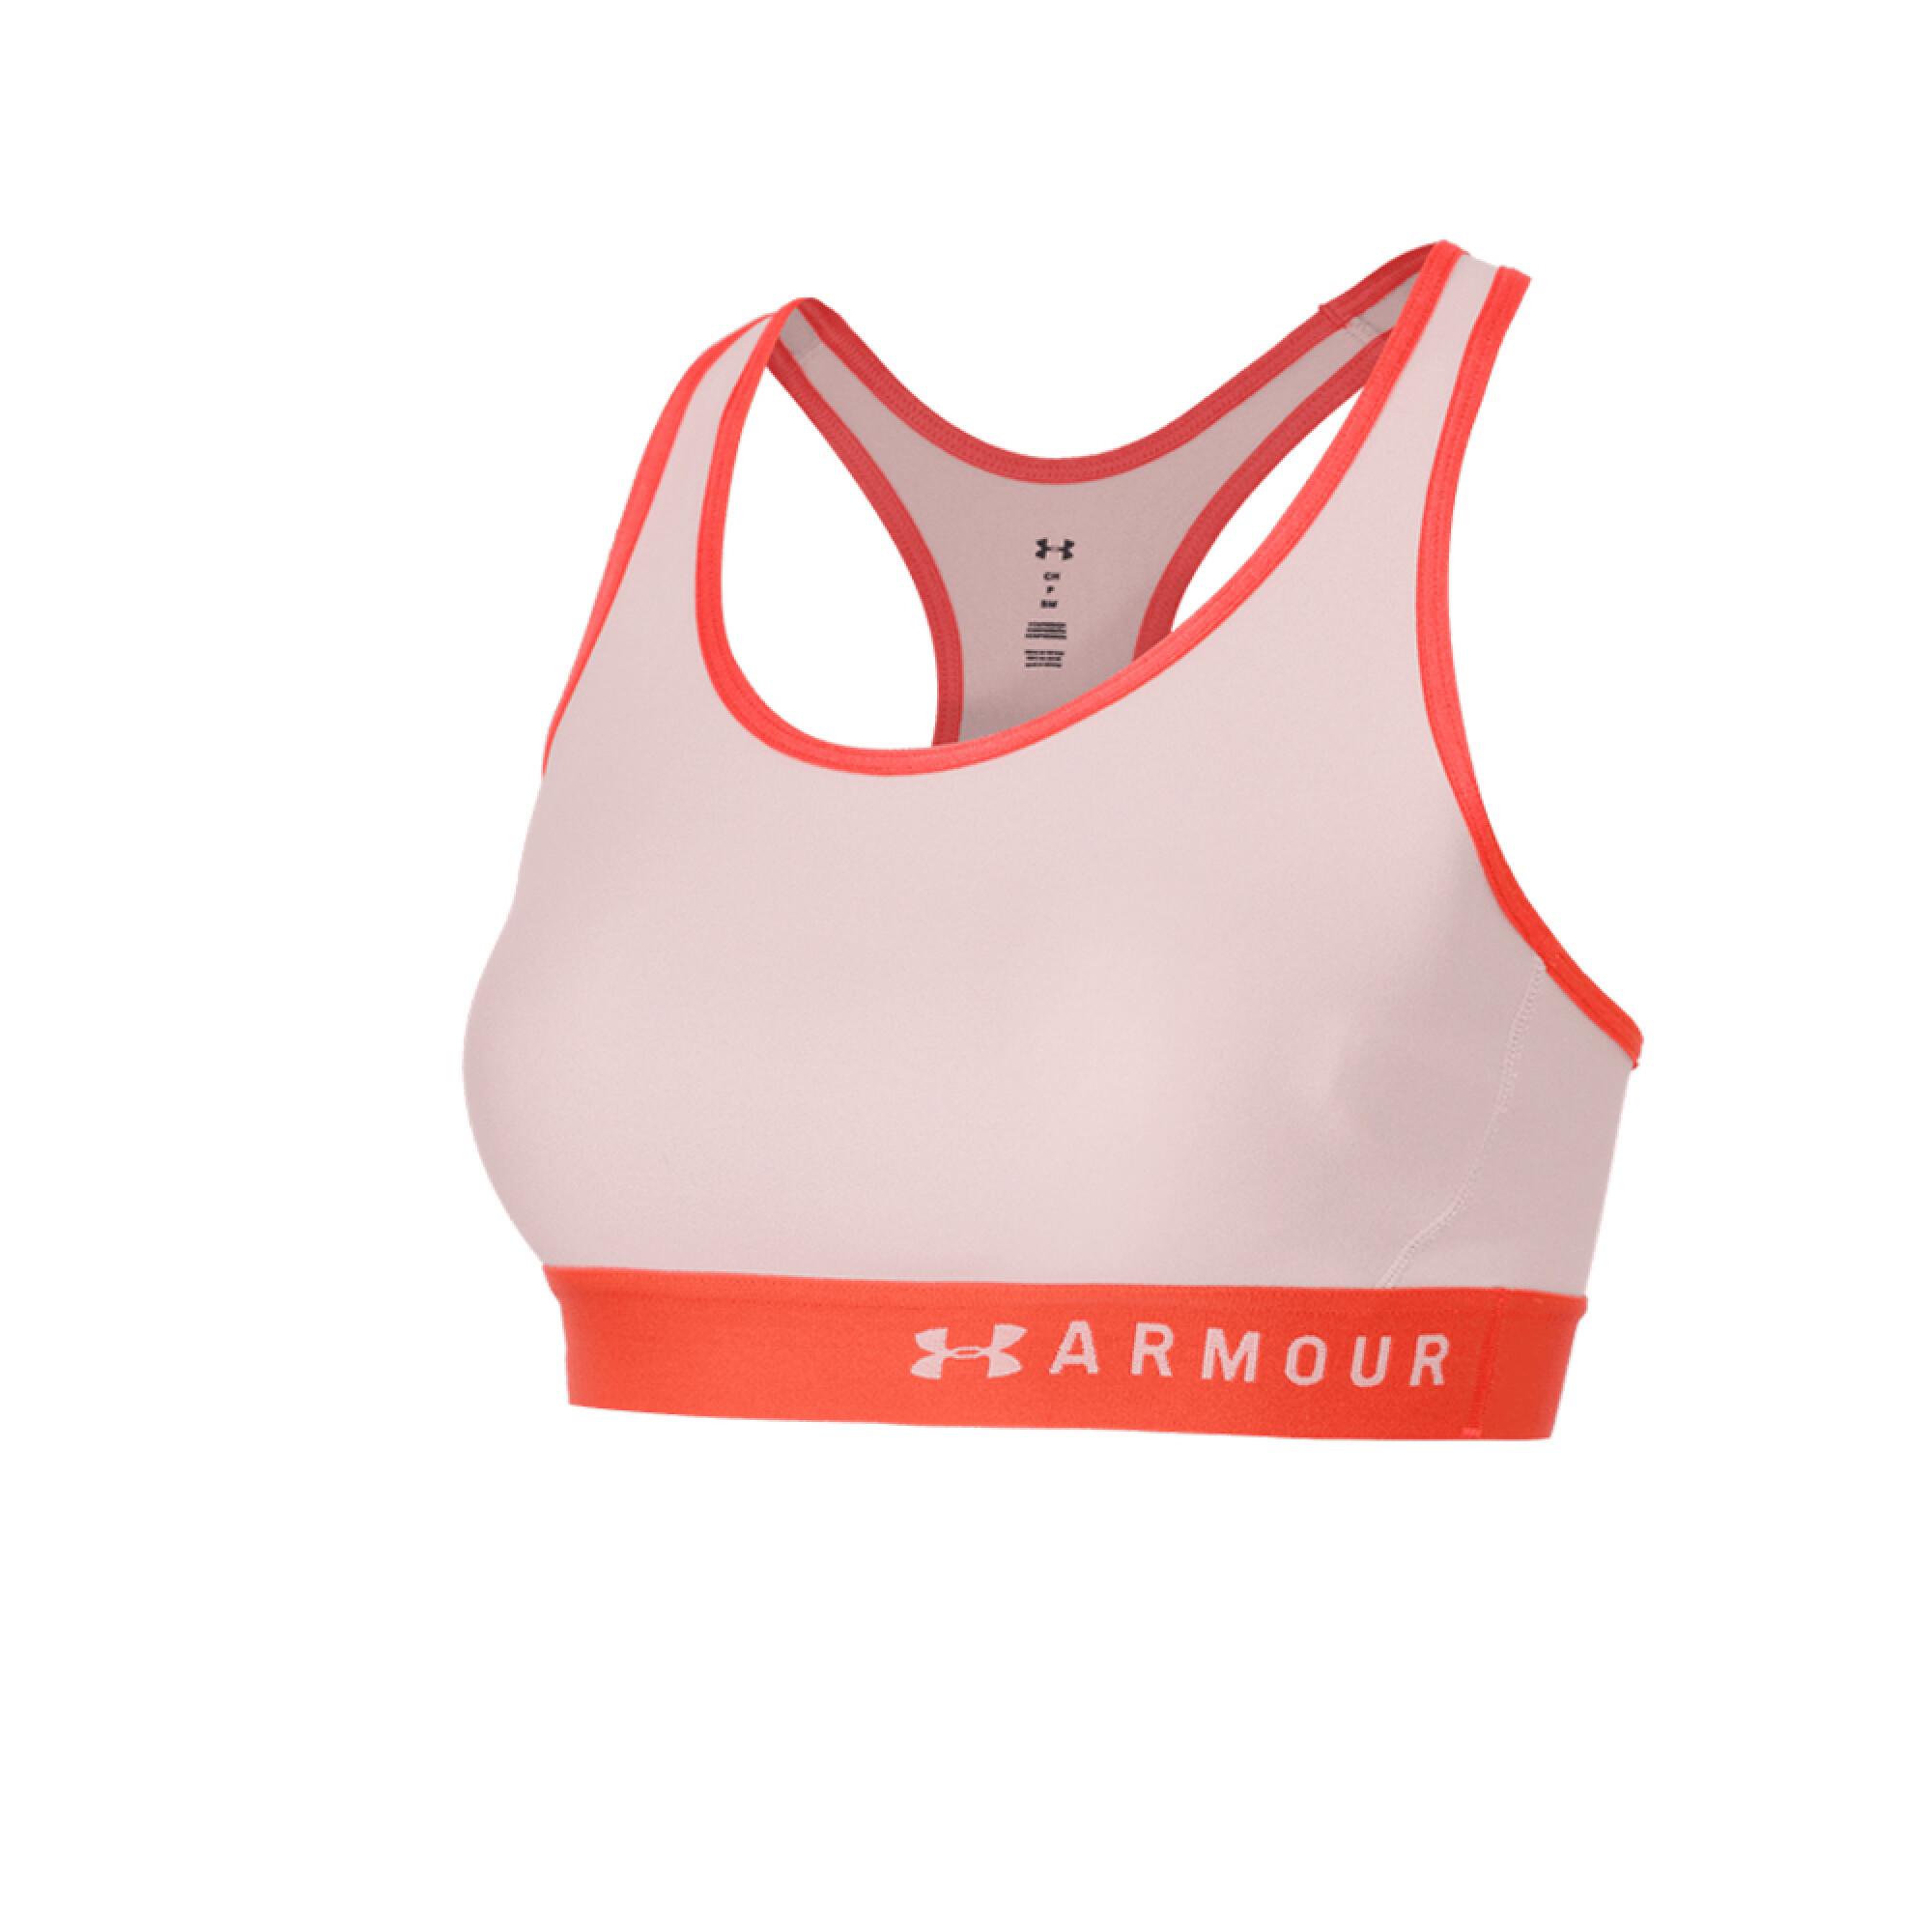 Top UNDER ARMOUR Suporte Top Low Sports Infinity Covered Rosa XS Mulher